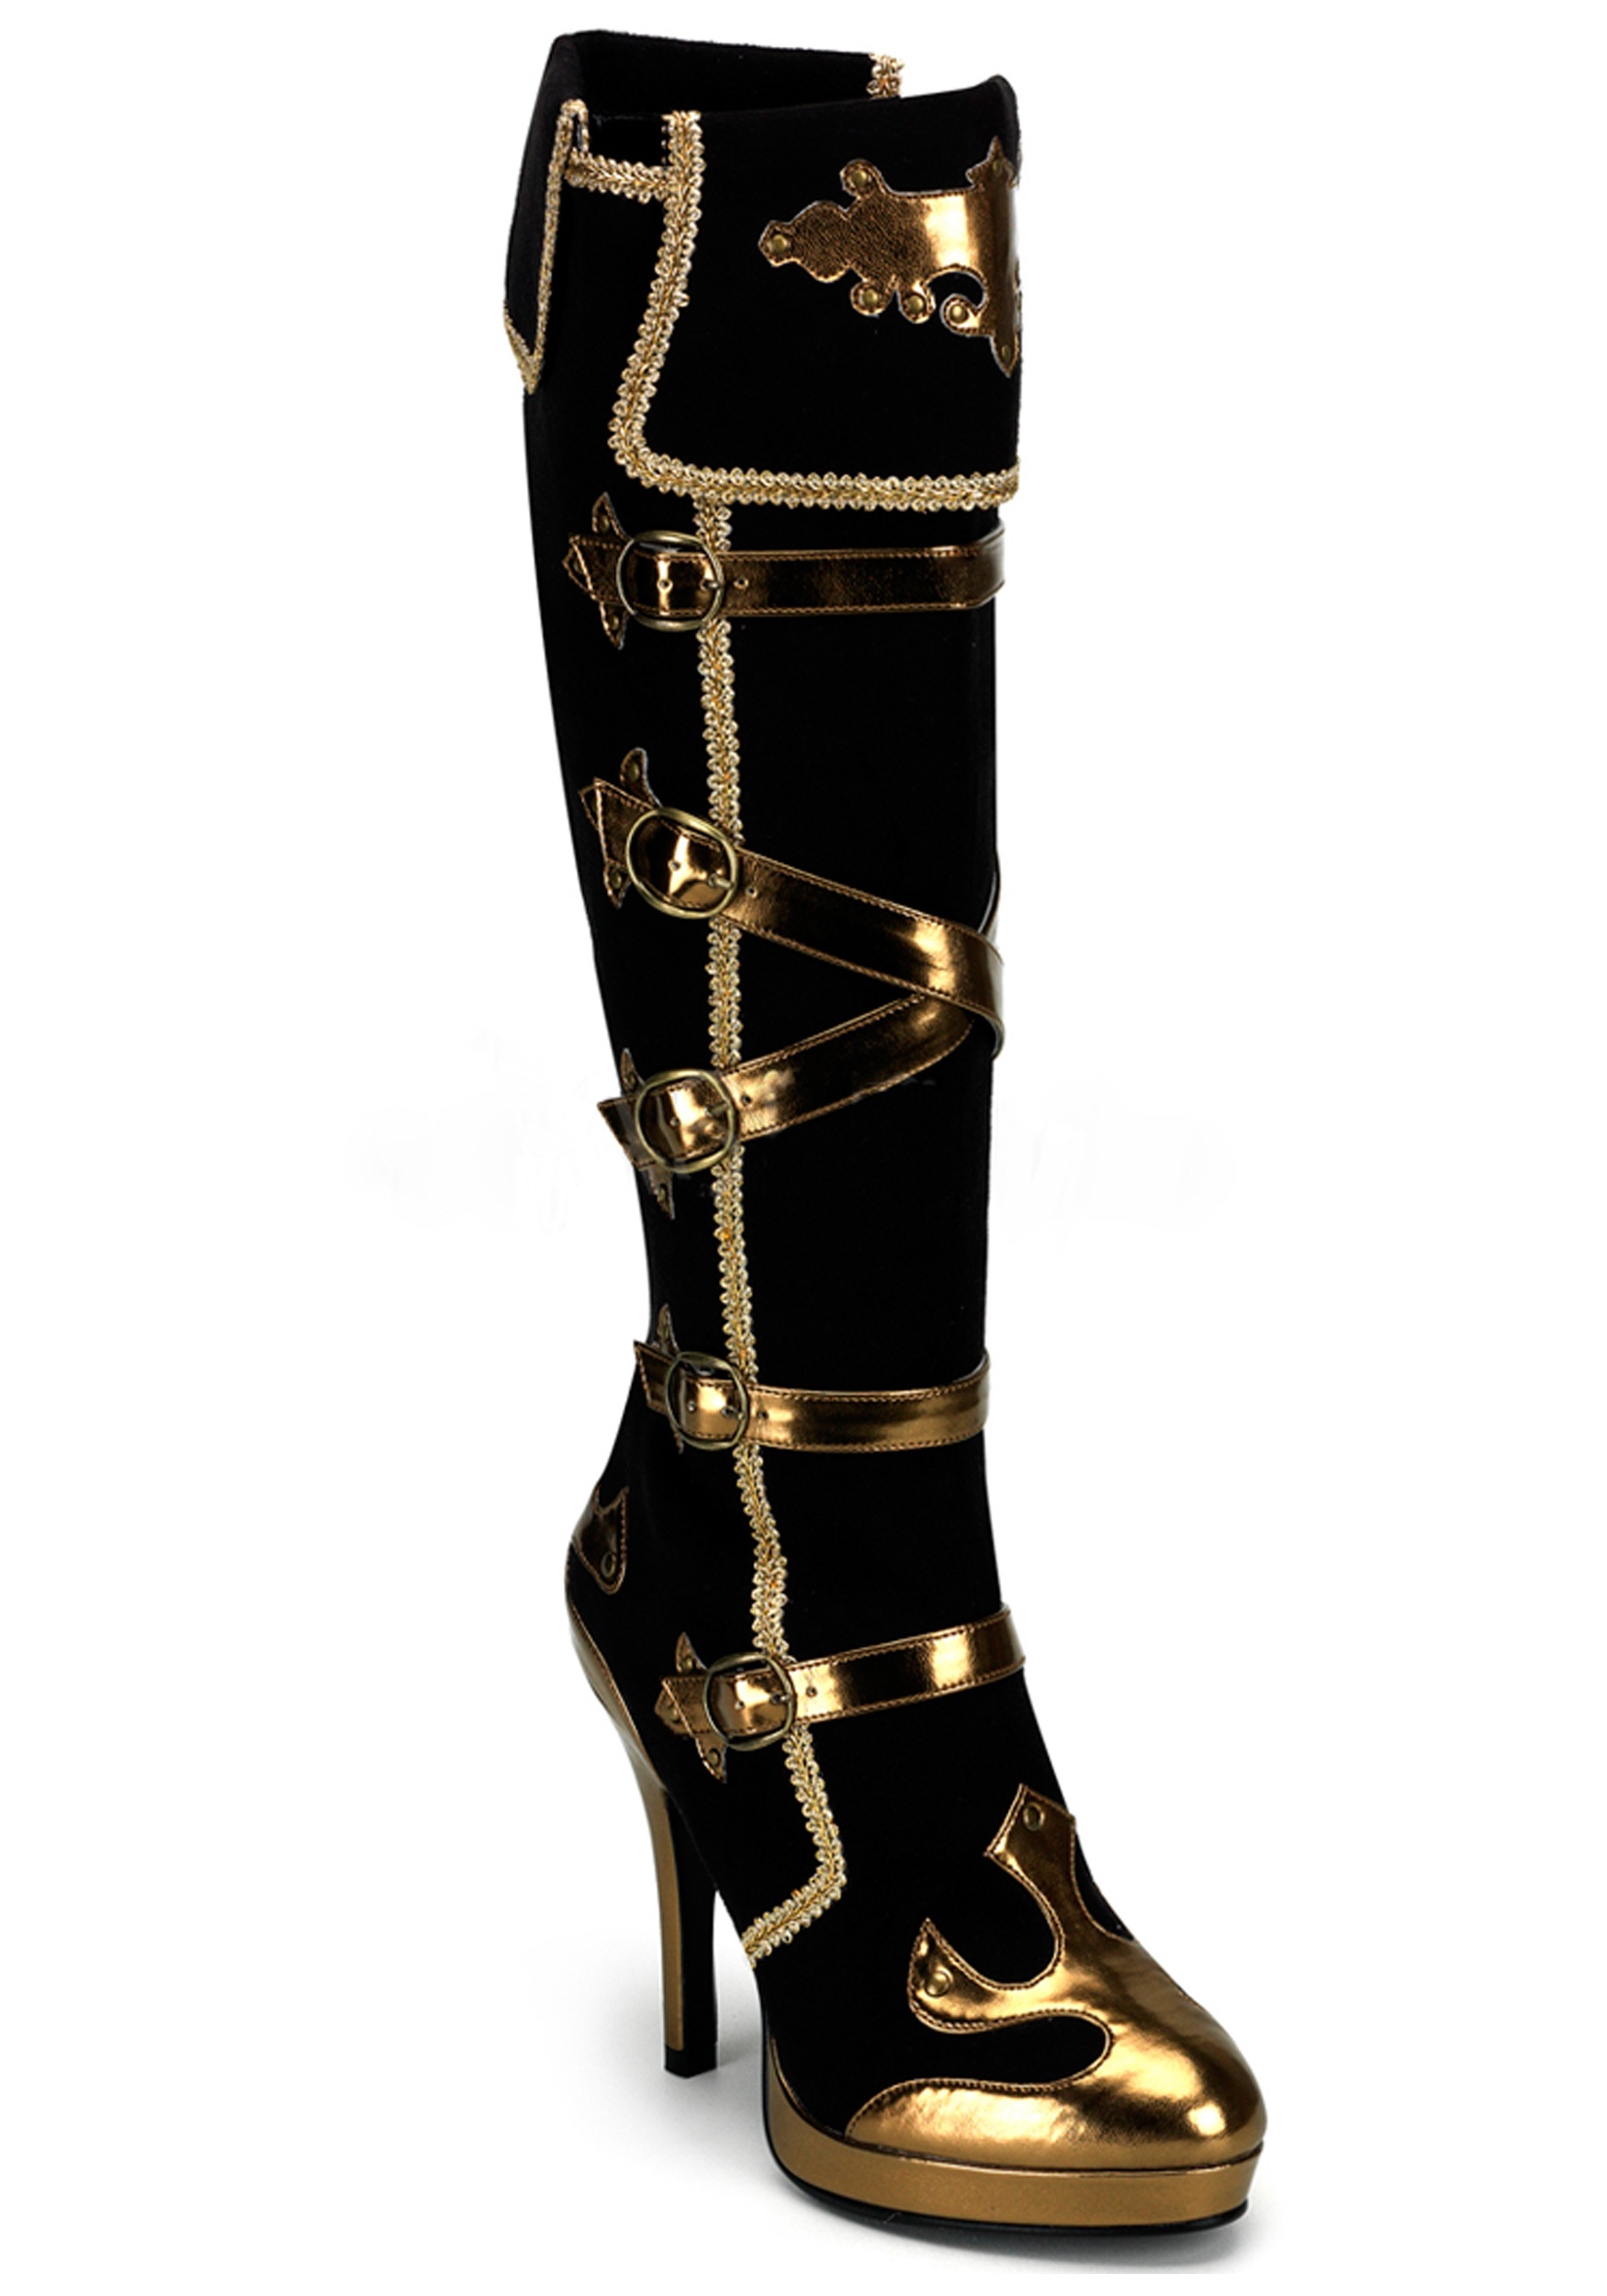 Sexy Black and Gold Pirate Costume Boots For Adults